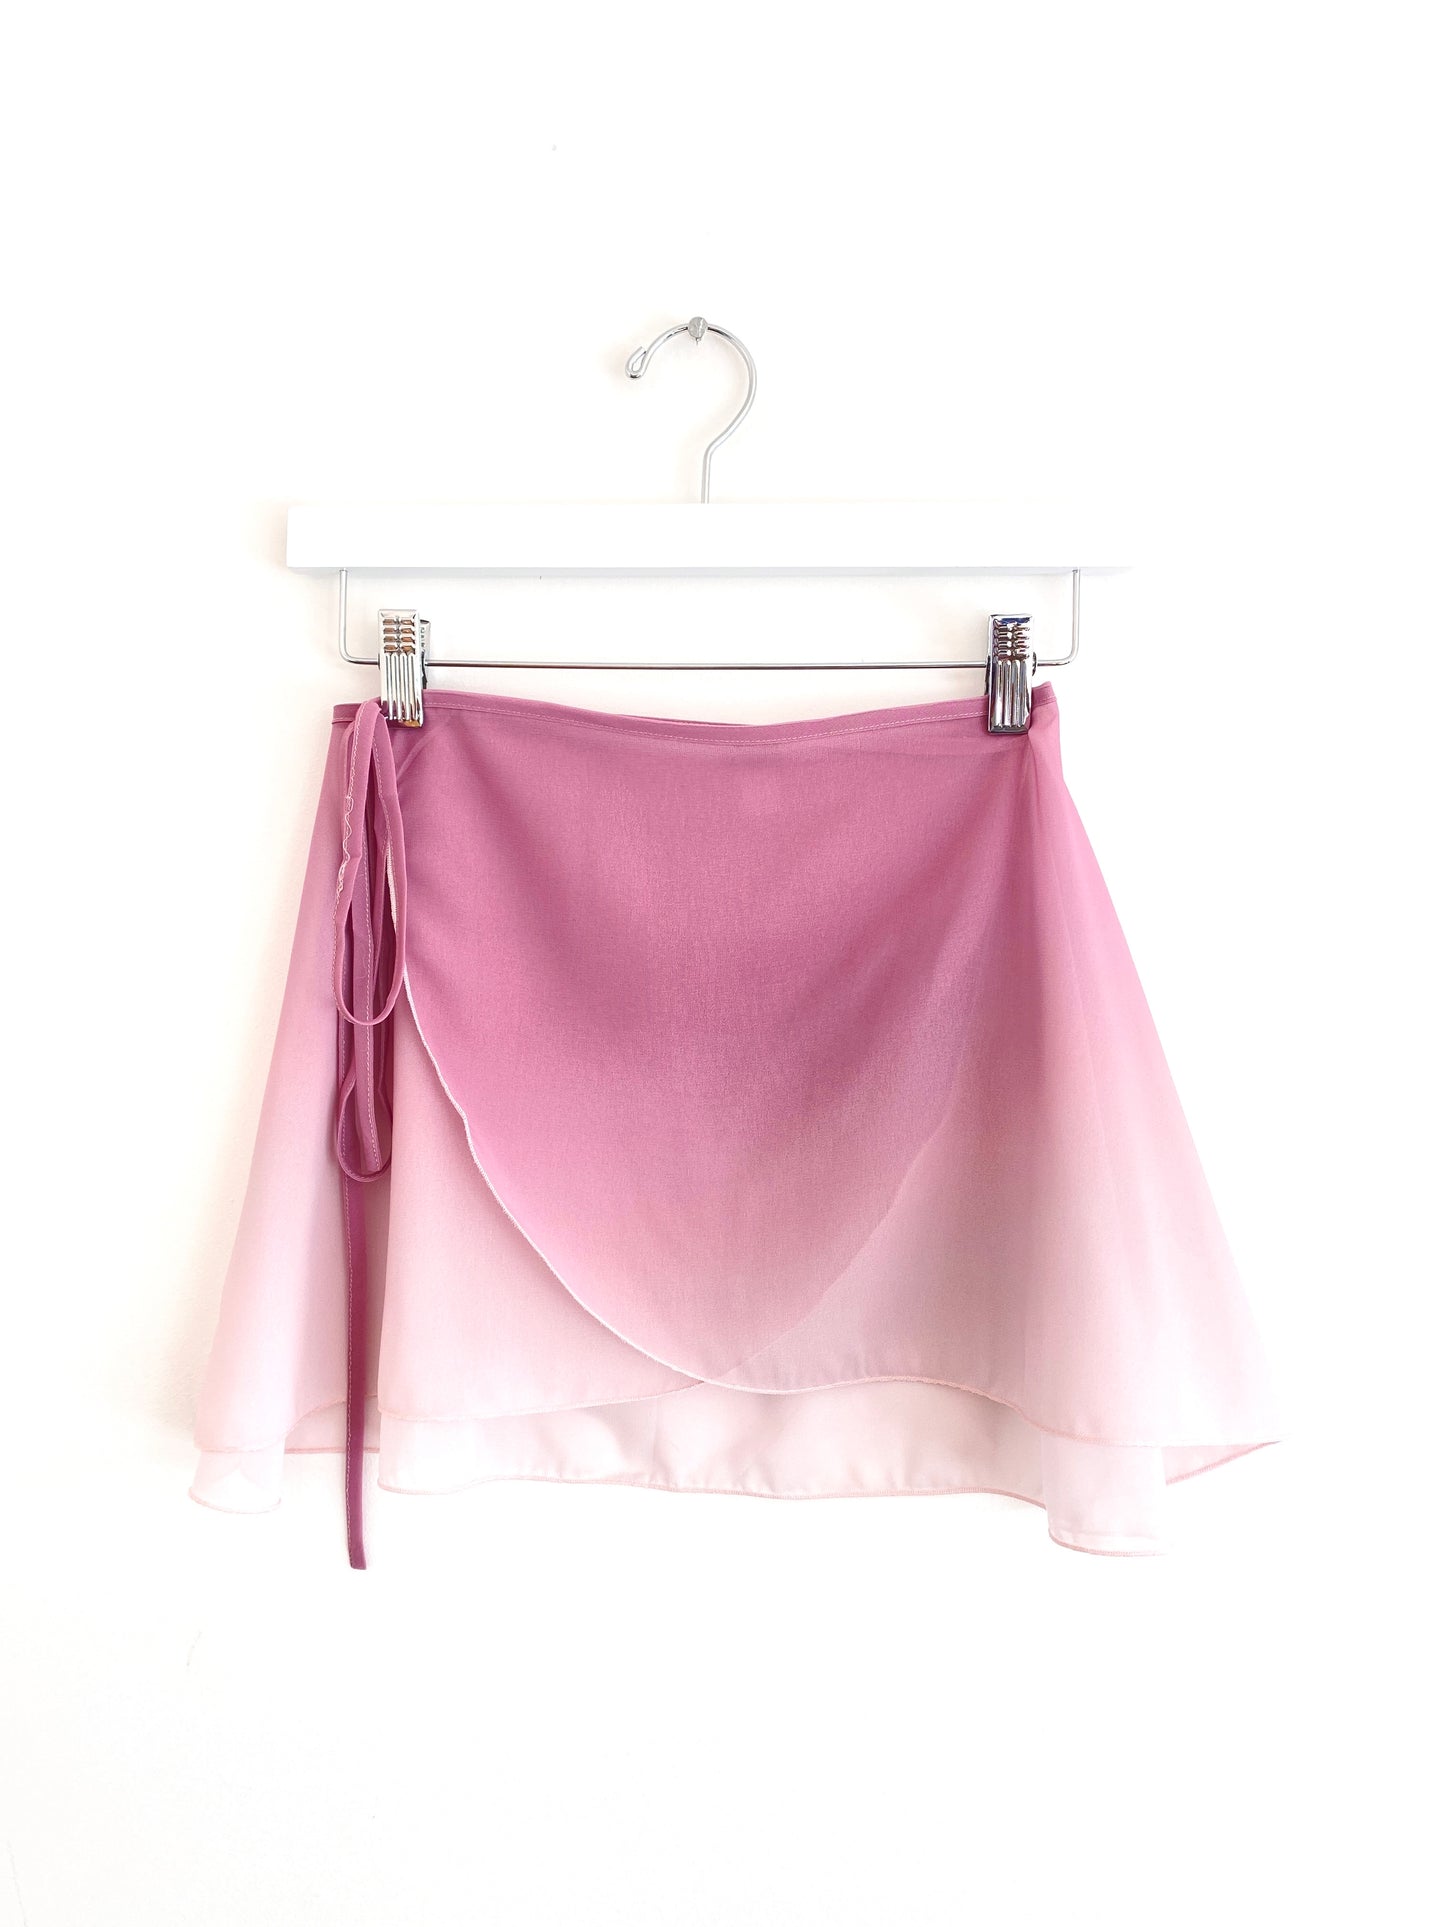 Ombre Wrap skirt from The Collective Dancewear